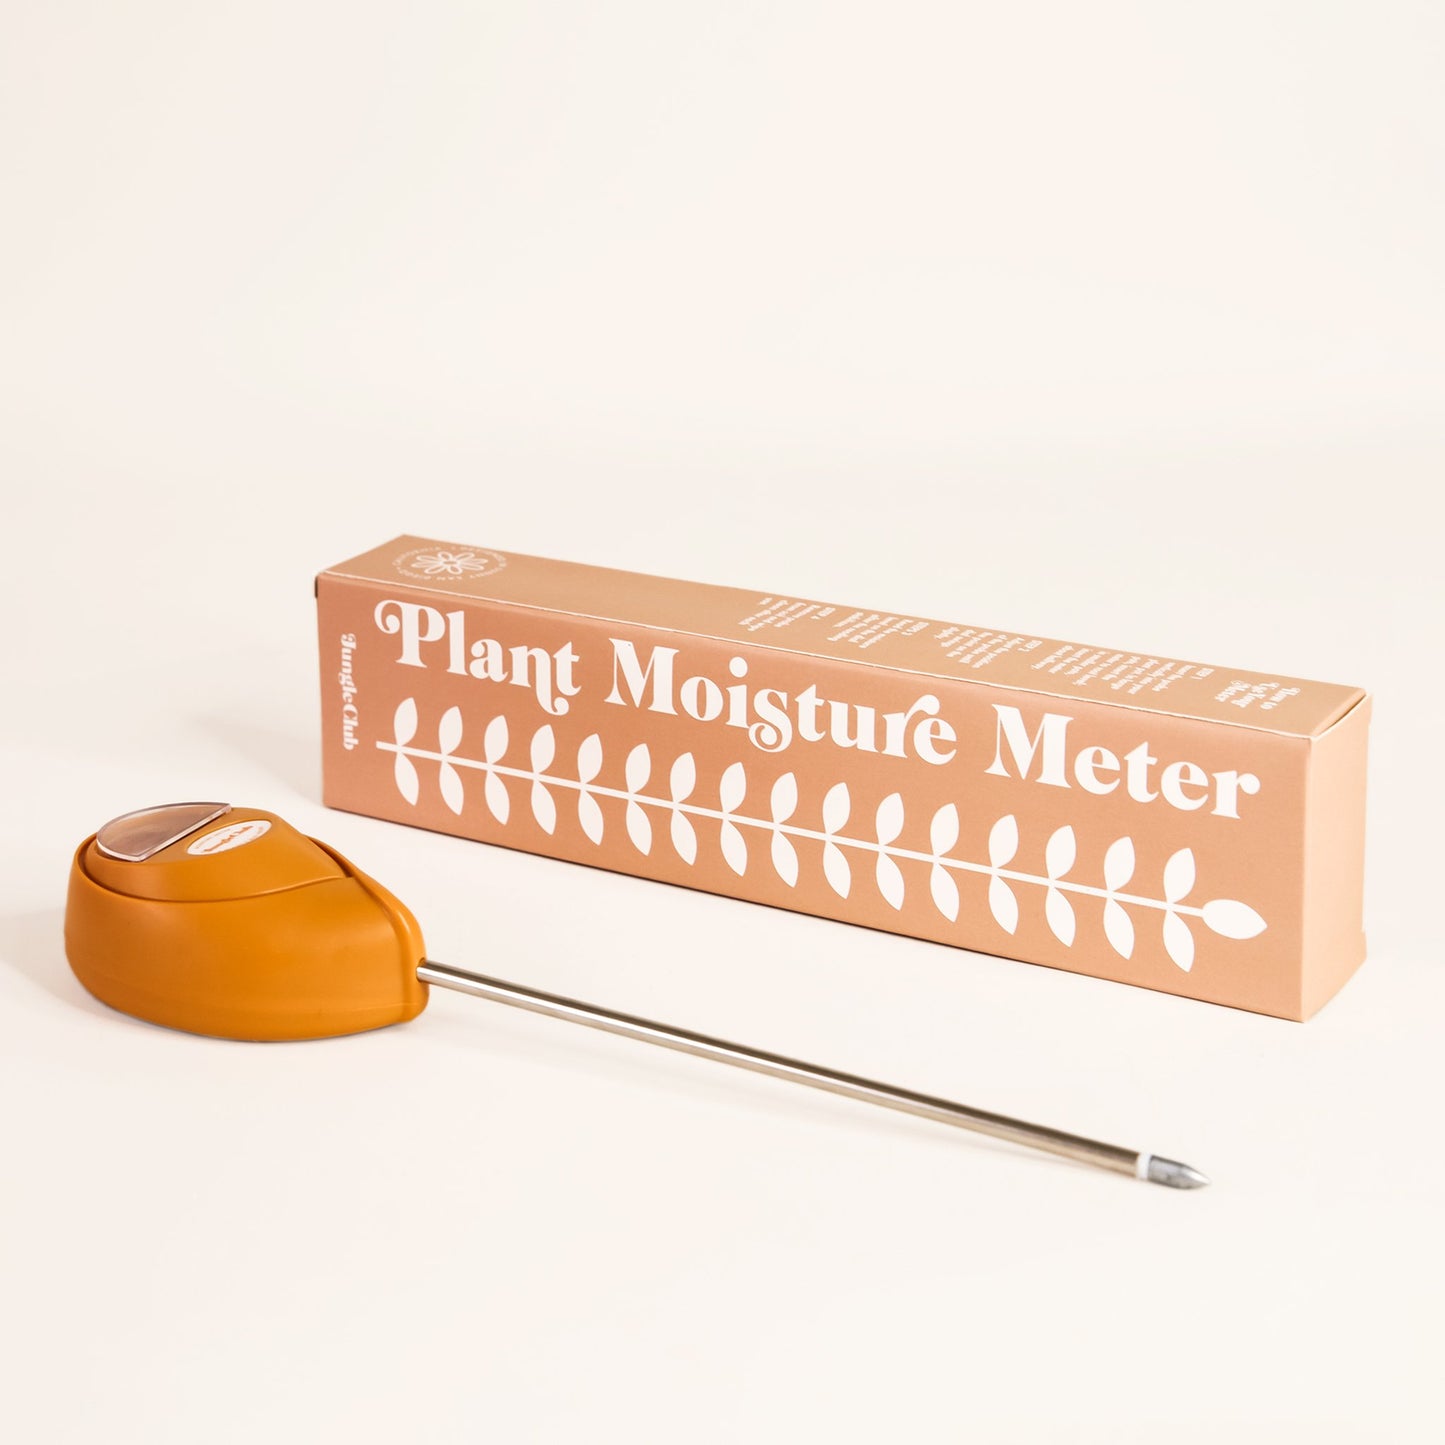 Orange moisture meter laying besides packaging that reads 'plant moisture meter' along the side of white leafy design. The moisture meter has an upside down teardrop shape and metal probe running from base. 